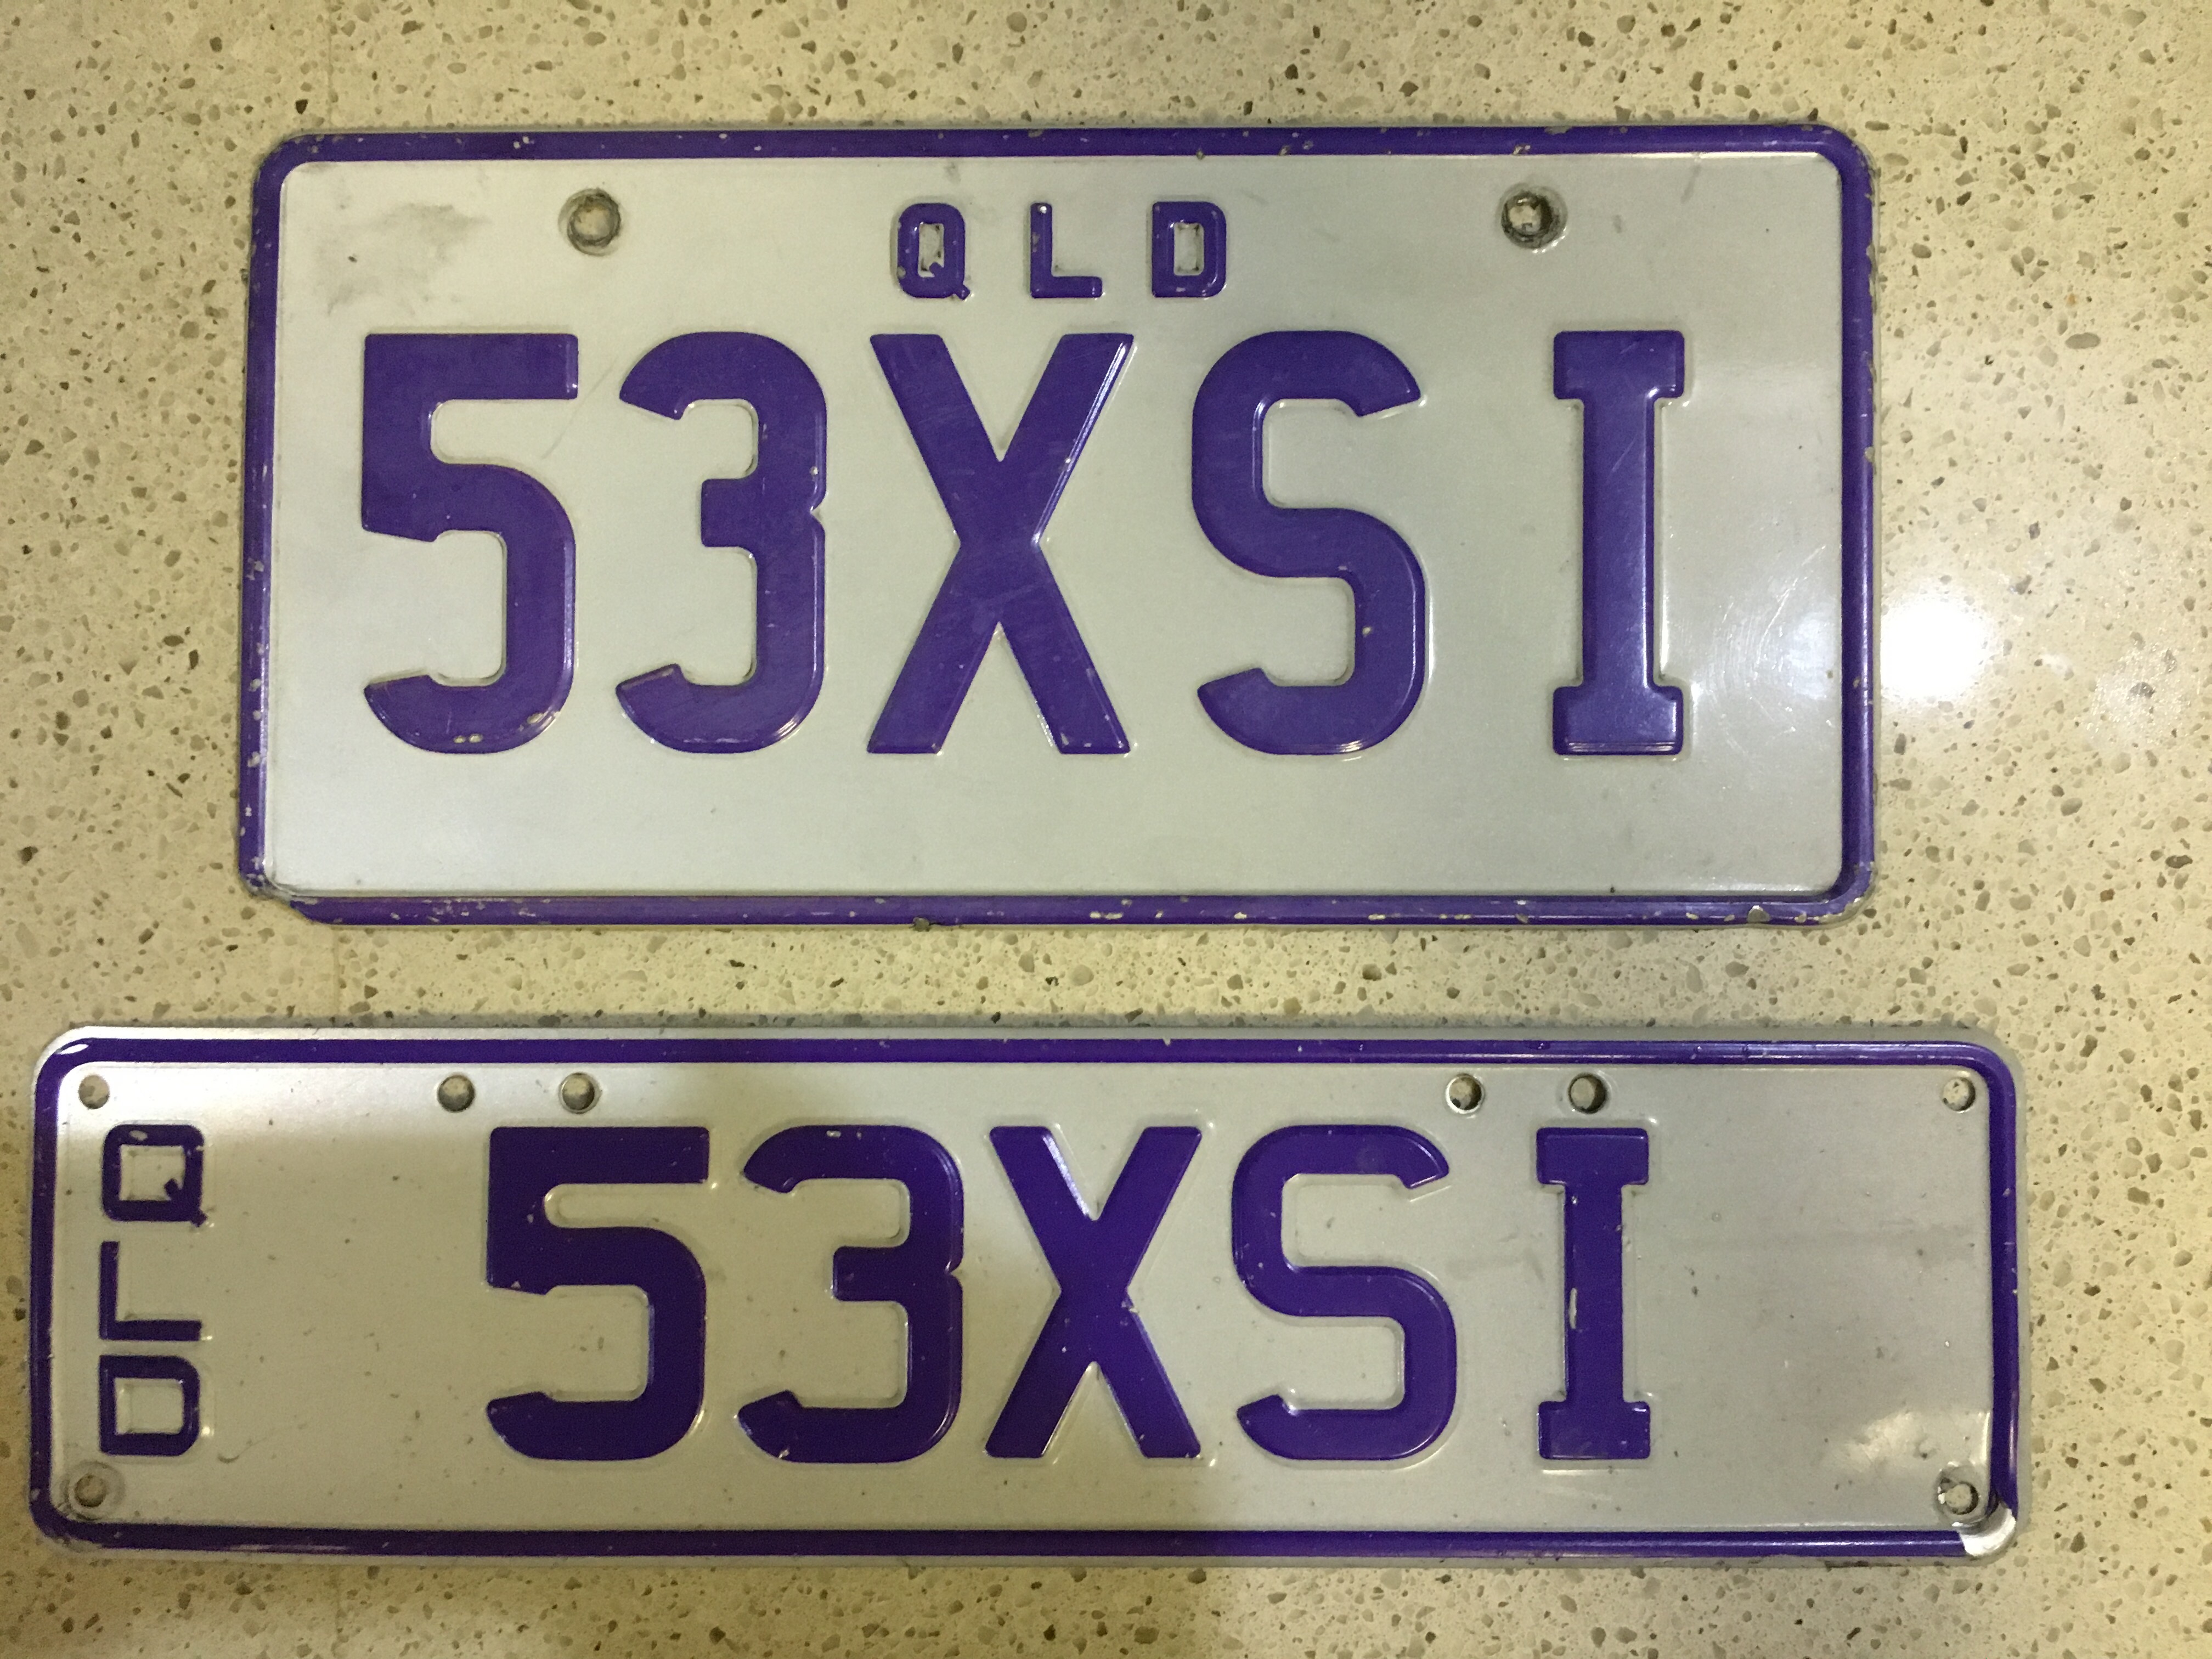 QLD Personalised Plates